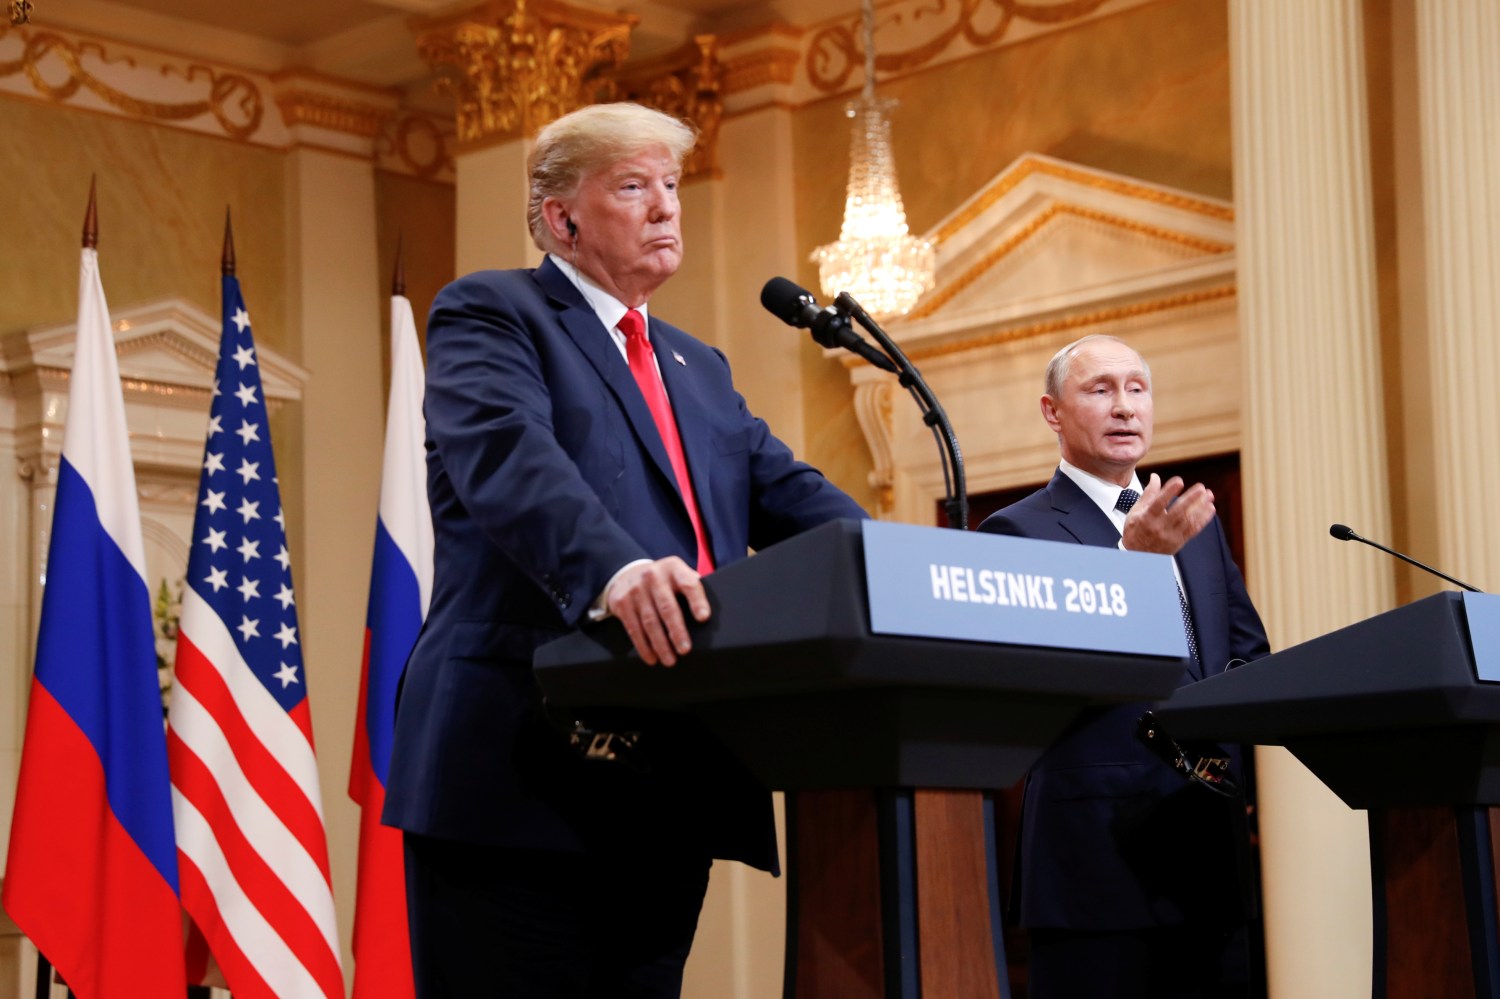 Russia's President Vladimir Putin gestures during a joint news conference with U.S. President Donald Trump after their meeting in Helsinki, Finland, July 16, 2018. REUTERS/Kevin Lamarque - RC1B10C69EC0